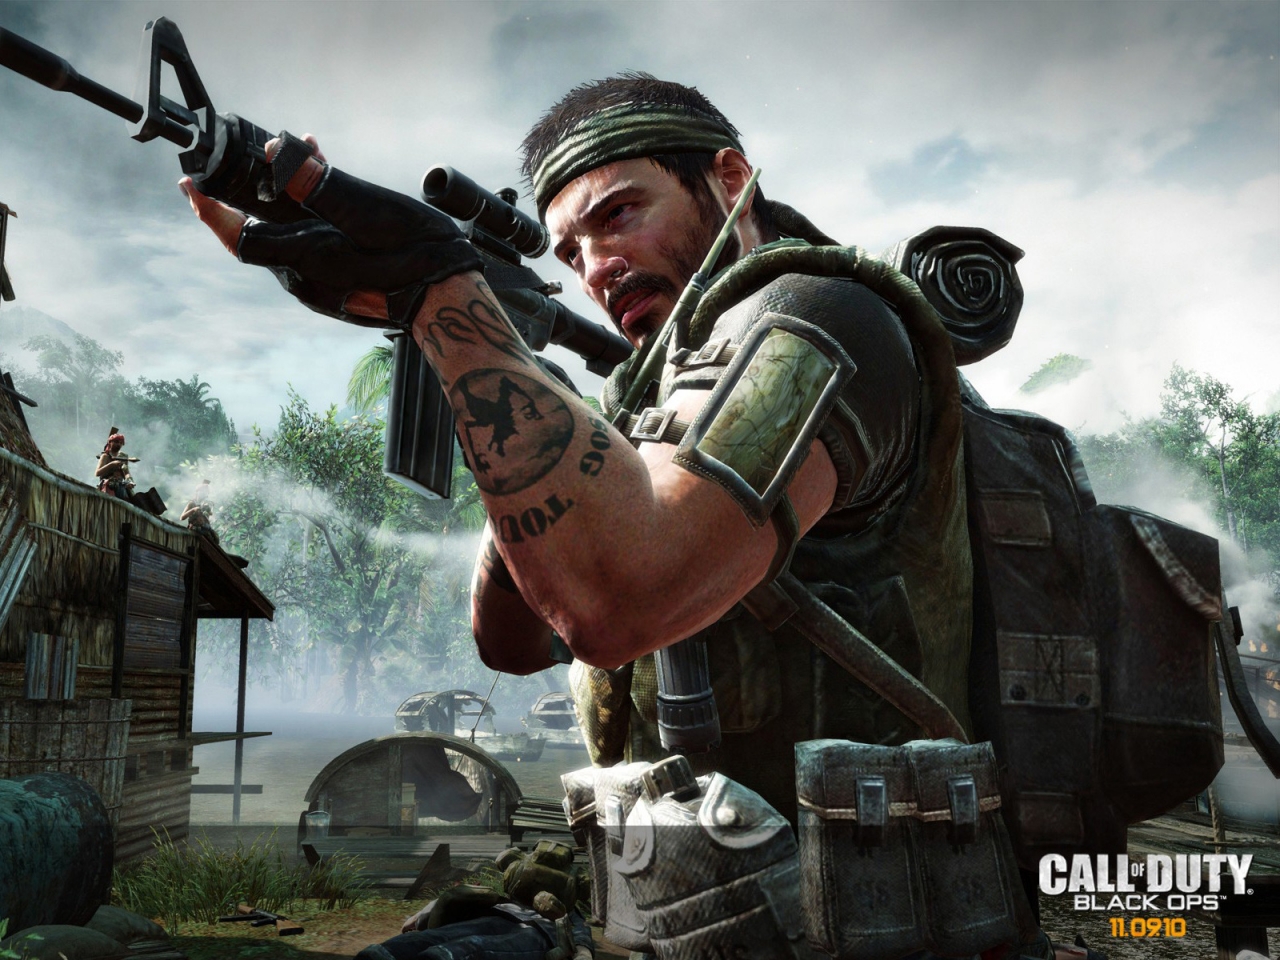 Call of Duty Black Ops Soldier for 1280 x 960 resolution